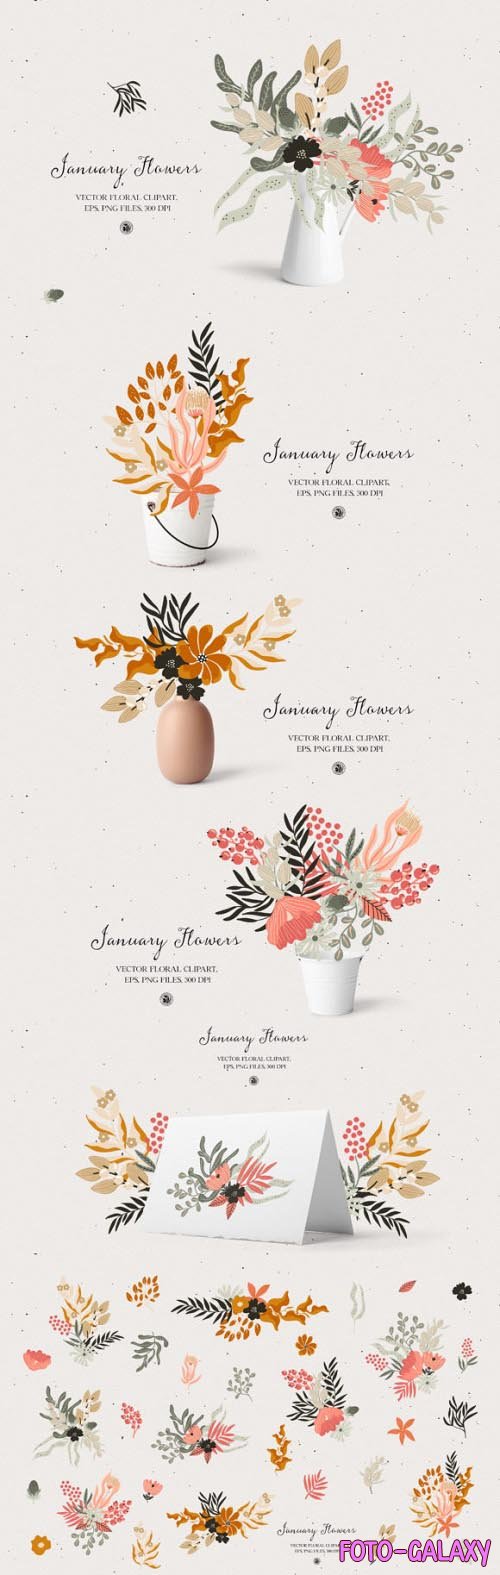 January Flowers - Floral Vector Set